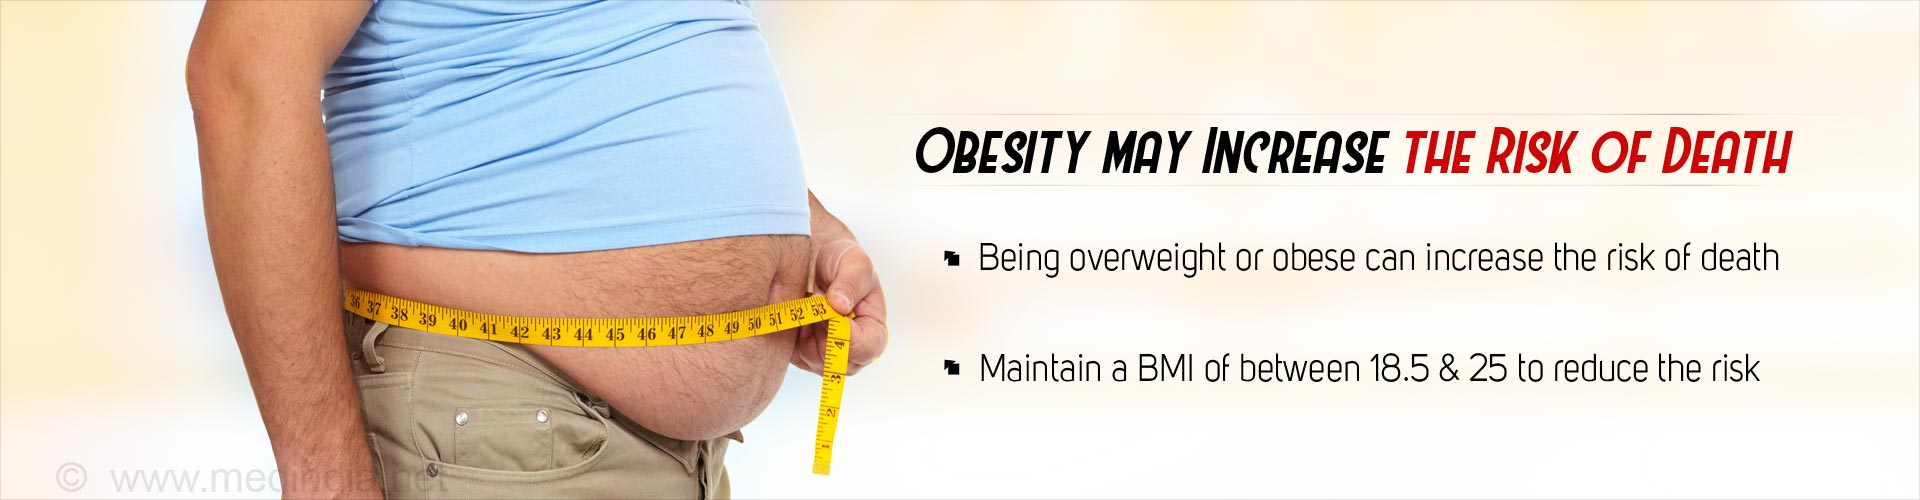 Obesity may increase the risk of death
- being overweight or obese can increase the risk of death
- maintain a BMI between 18.5 & 25 to reduce risk